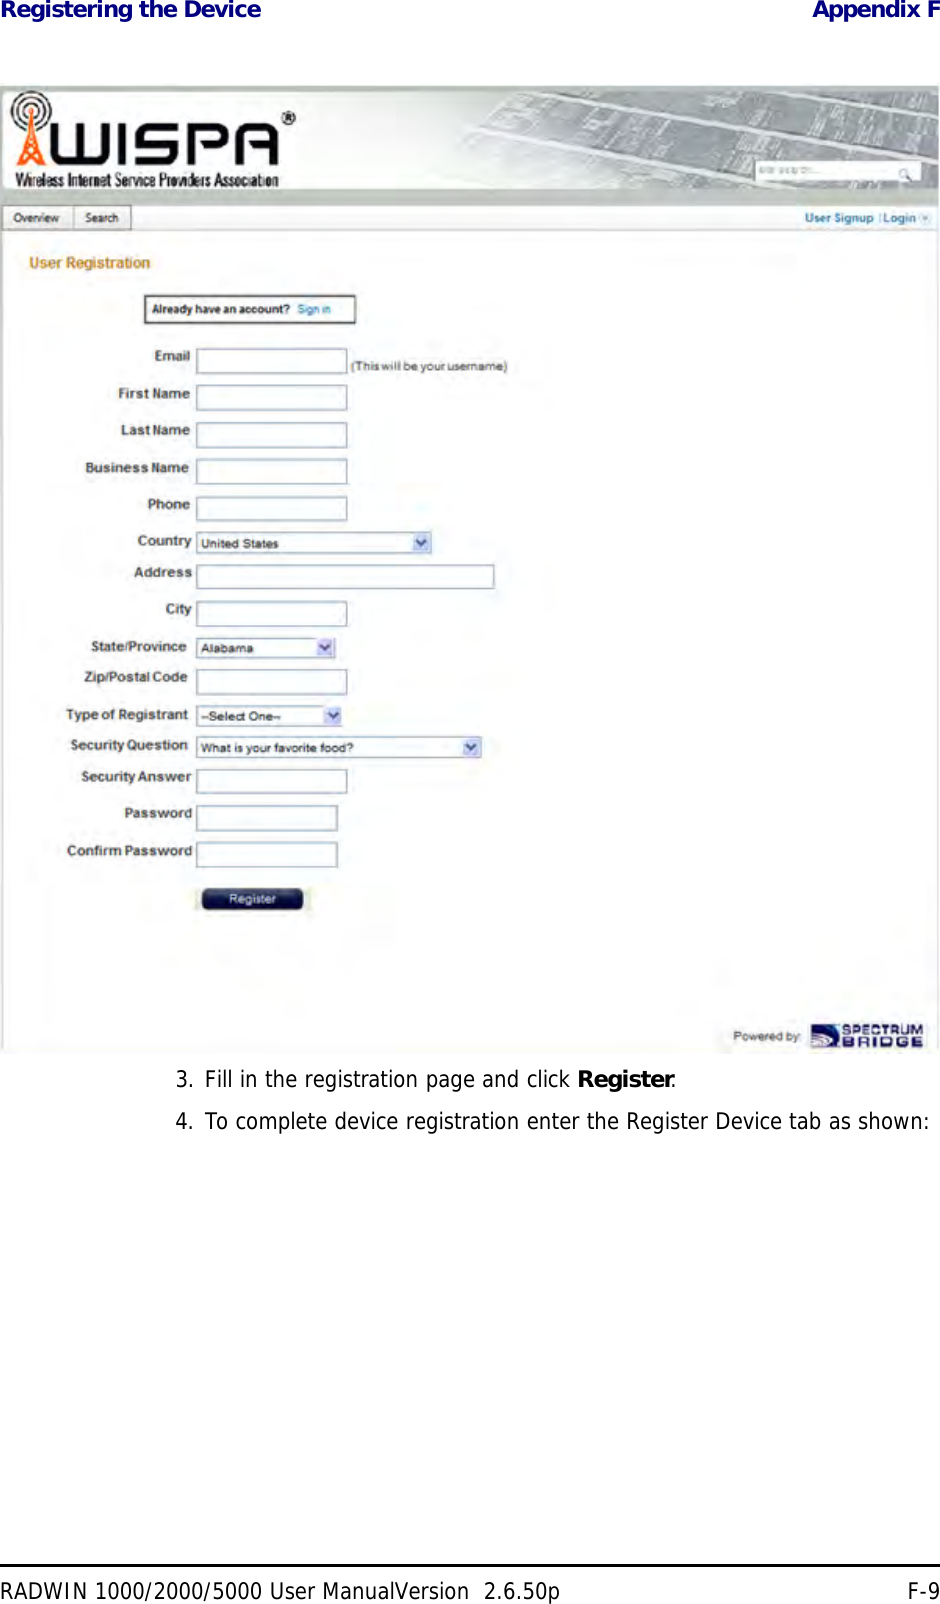 Registering the Device Appendix FRADWIN 1000/2000/5000 User ManualVersion  2.6.50p F-93. Fill in the registration page and click Register.4. To complete device registration enter the Register Device tab as shown: